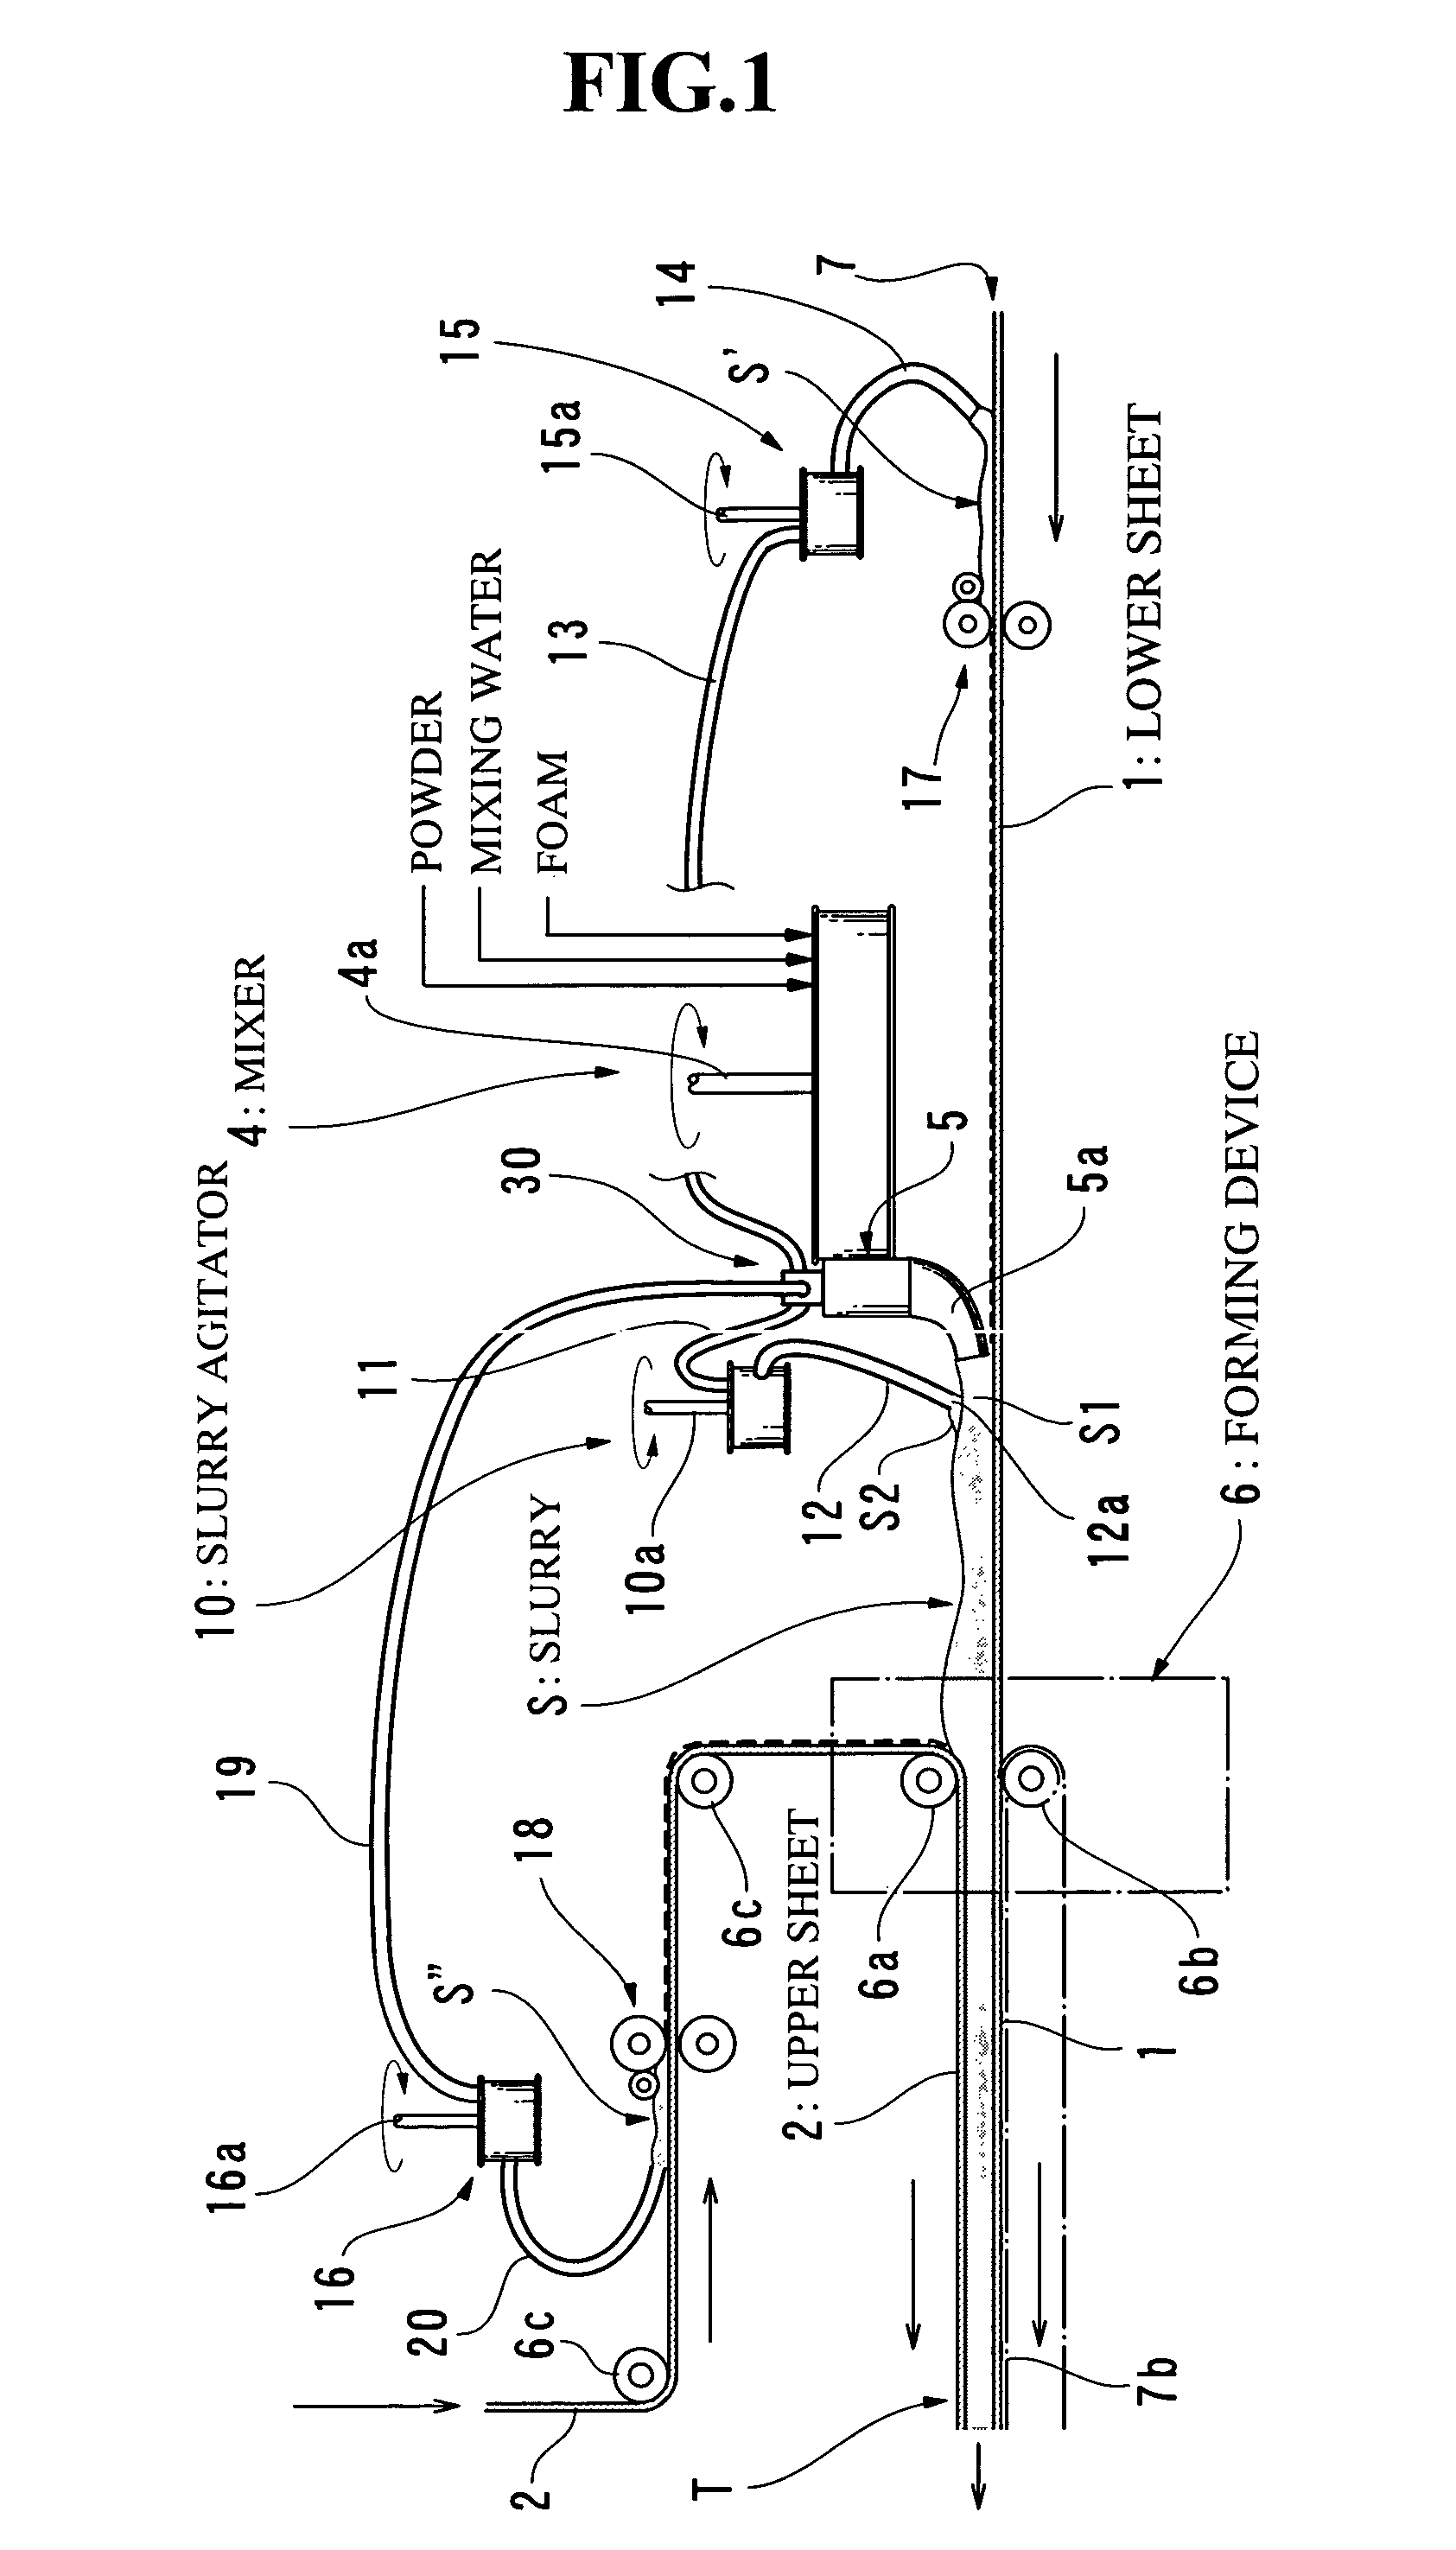 Apparatus and method for fractionating gypsum slurry and method of producing gypsum board